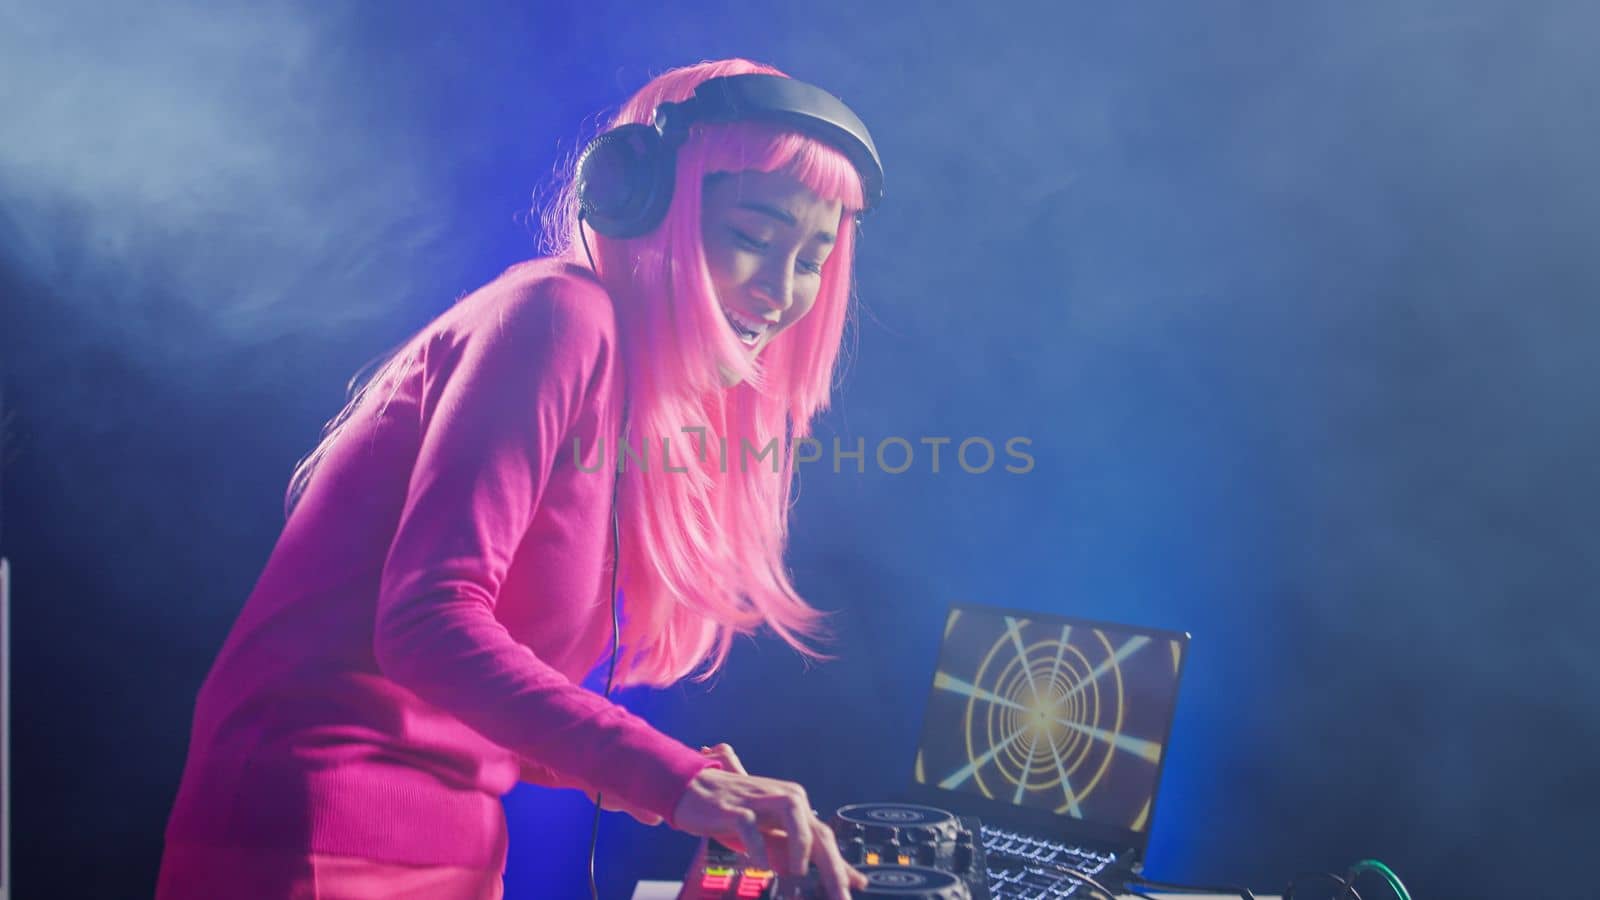 Smiling artist standing at dj table playing electronic music at professional mixer console in studio over pink background. Asian musician performing techno sound, having fun in club at night time